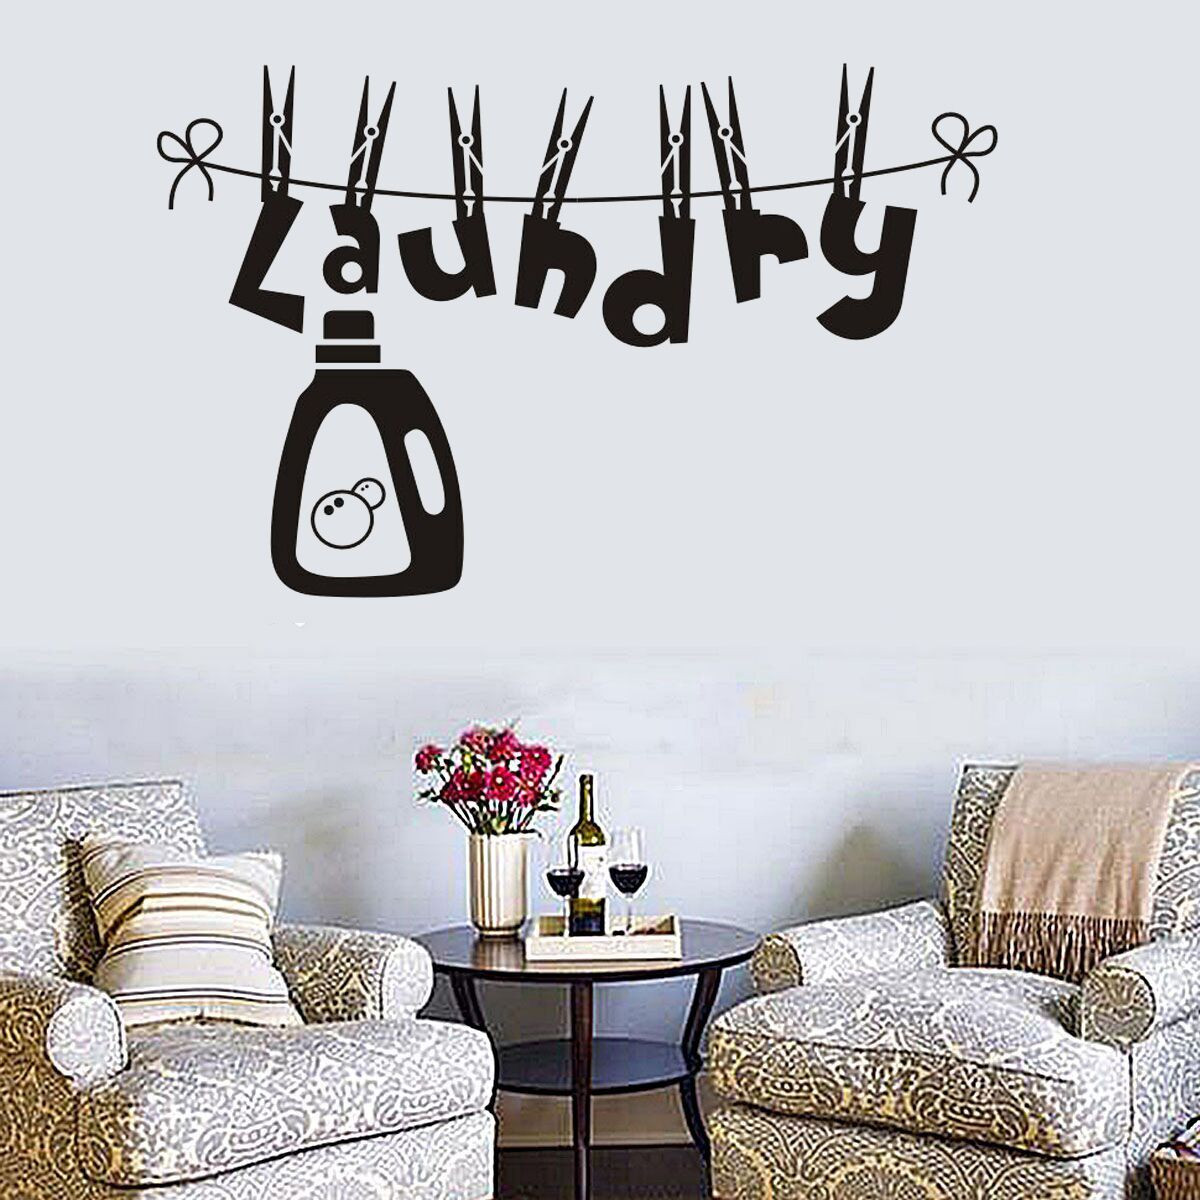 Laundry-Room-Wall-Sticker-PVC-Waterproof-Removable-Wall-Sticker-Painting-Home-Decor-1719040-9